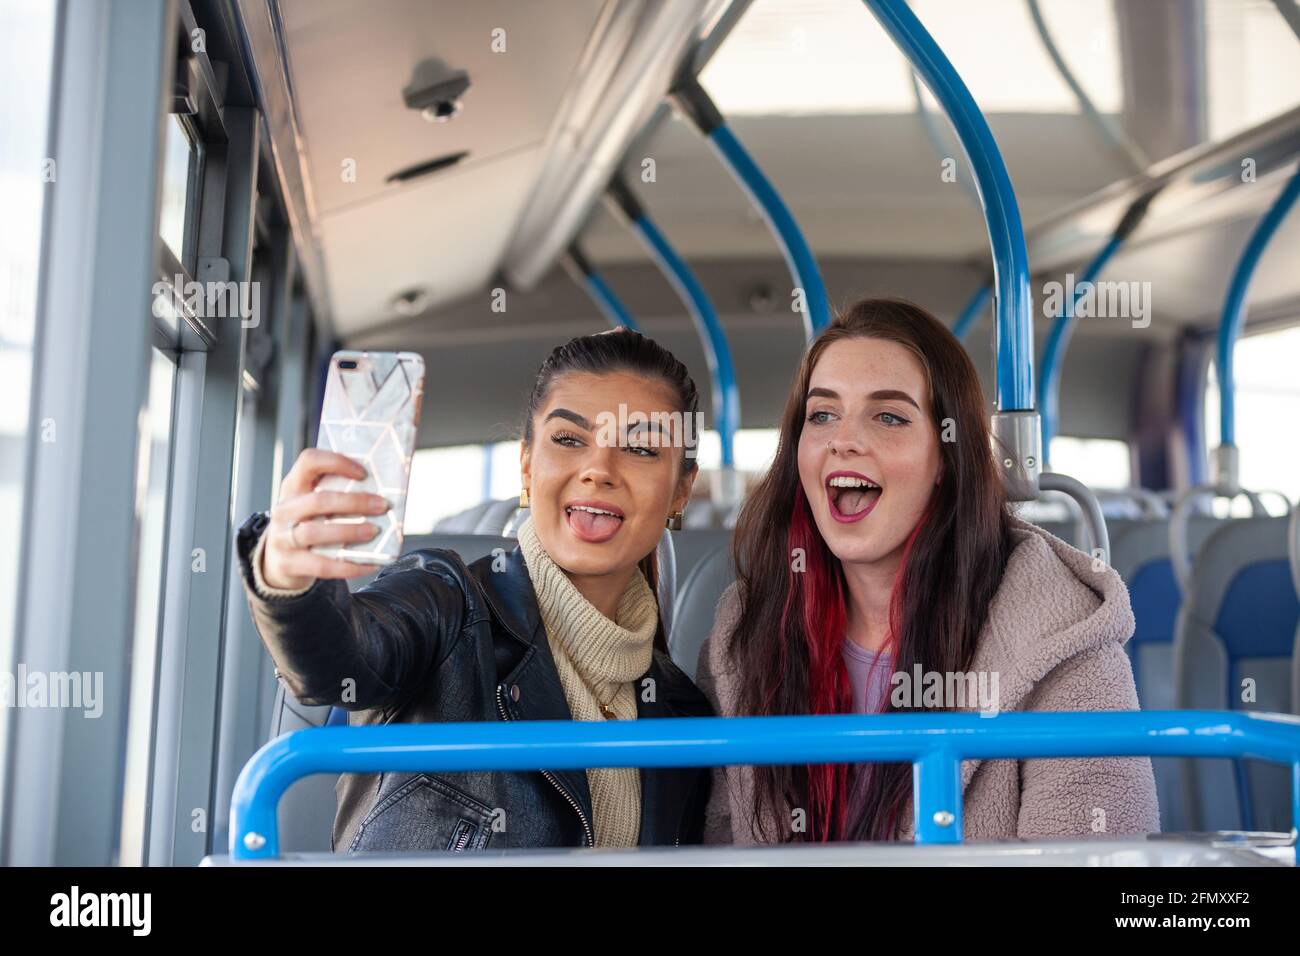 Two young women pulling faces and taking a selfie of themselves inside a bus Stock Photo